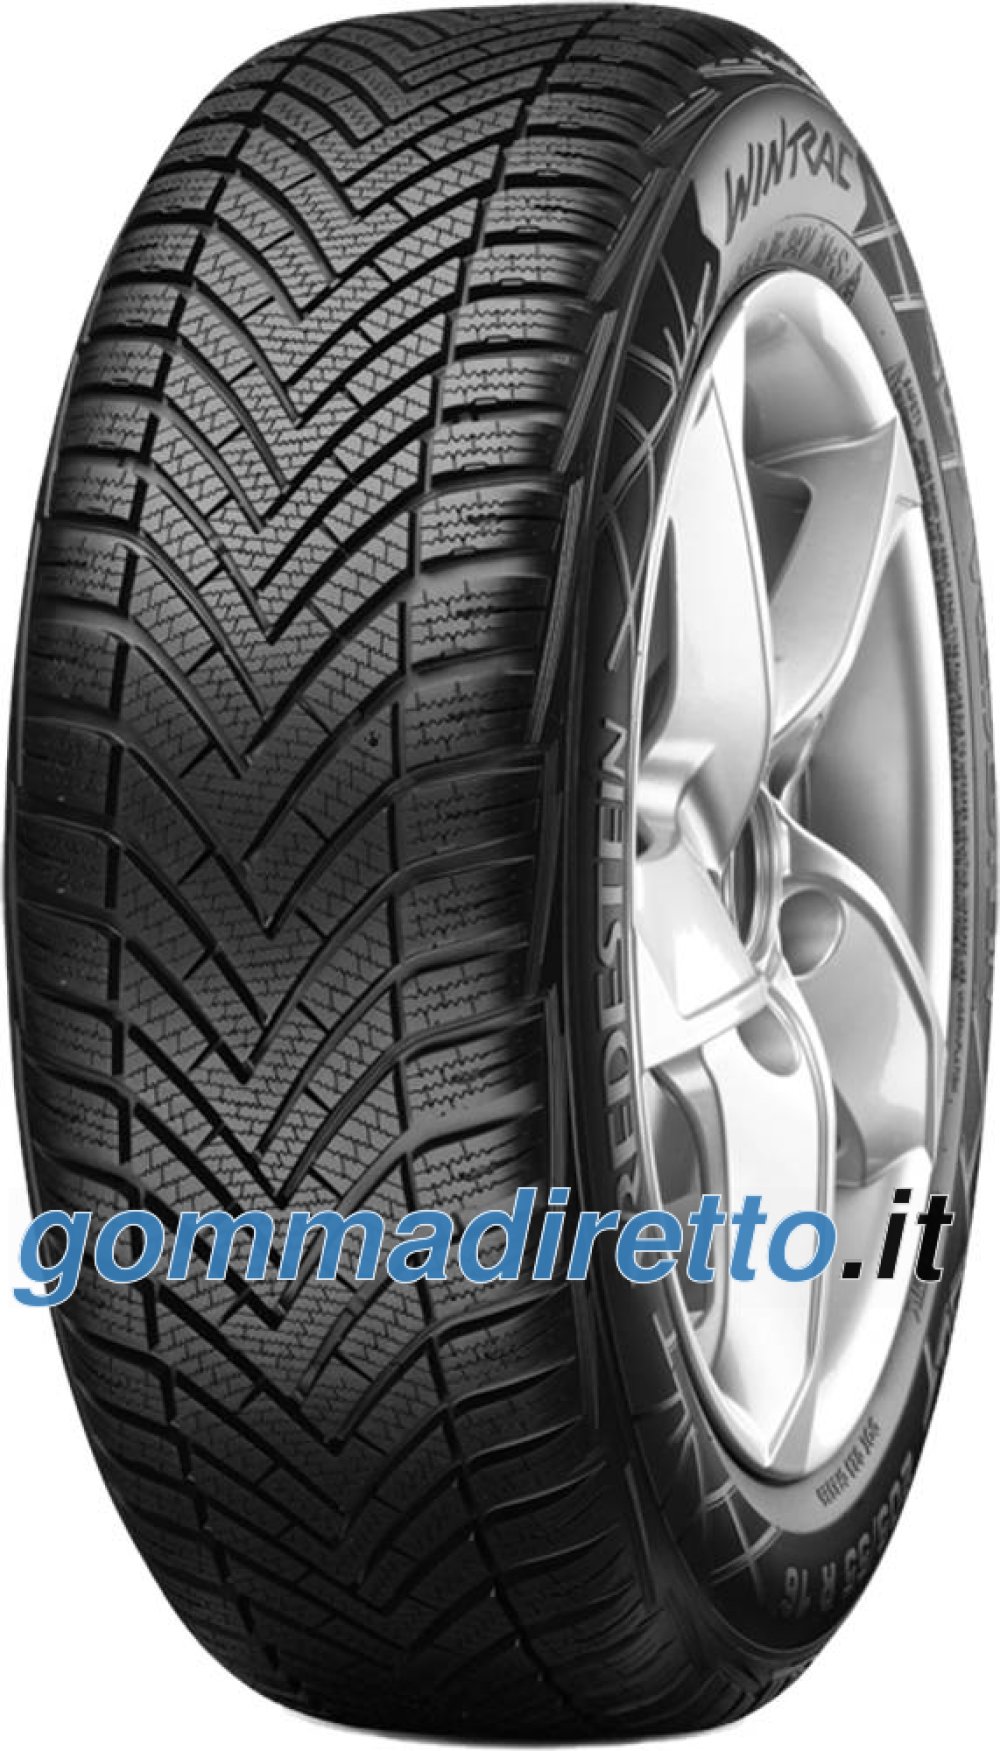 Image of Vredestein Wintrac ( 195/65 R15 91H )